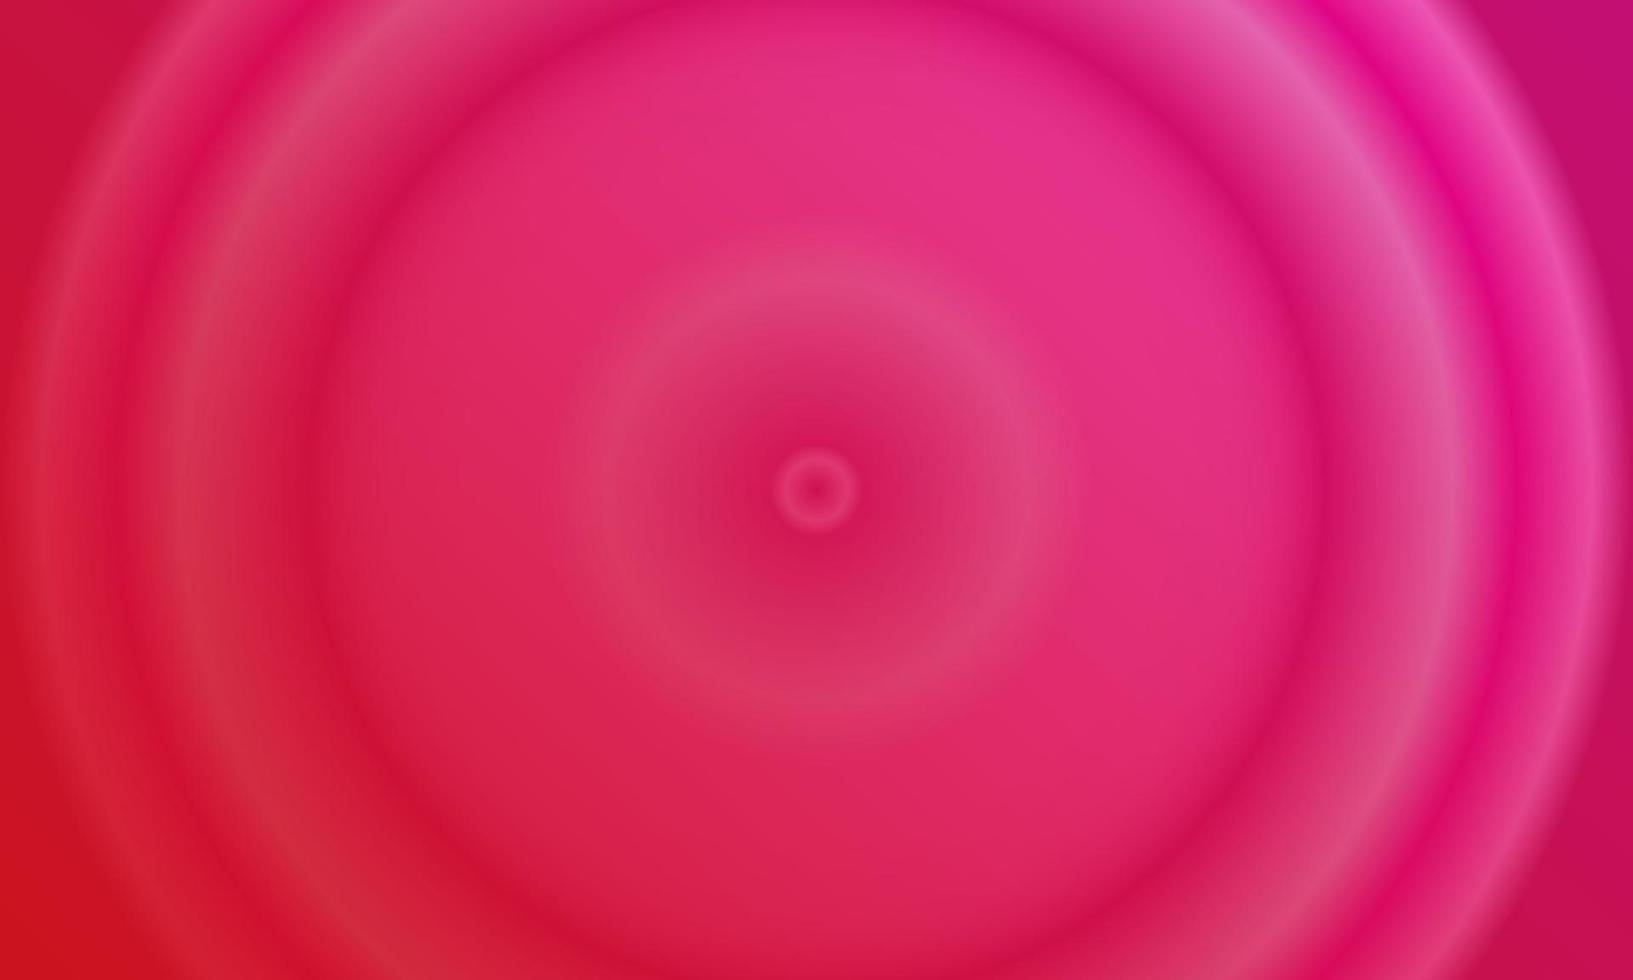 pink and red radial gradient abstract background. simple, minimal, modern and colorful style. use for homepage, backgdrop, wallpaper, cover banner or flyer vector